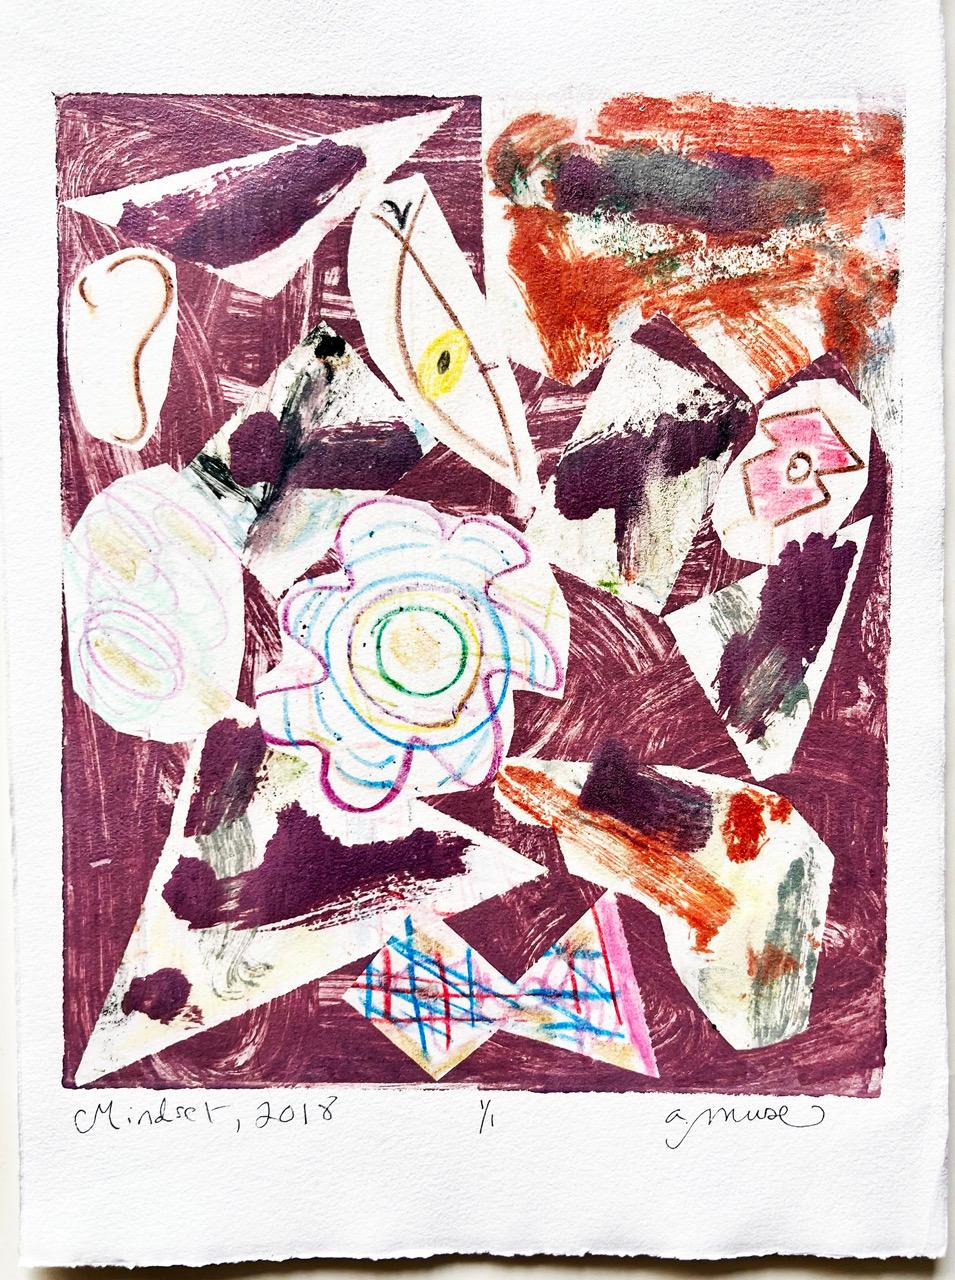 Mindset, Edition of One Work on Paper